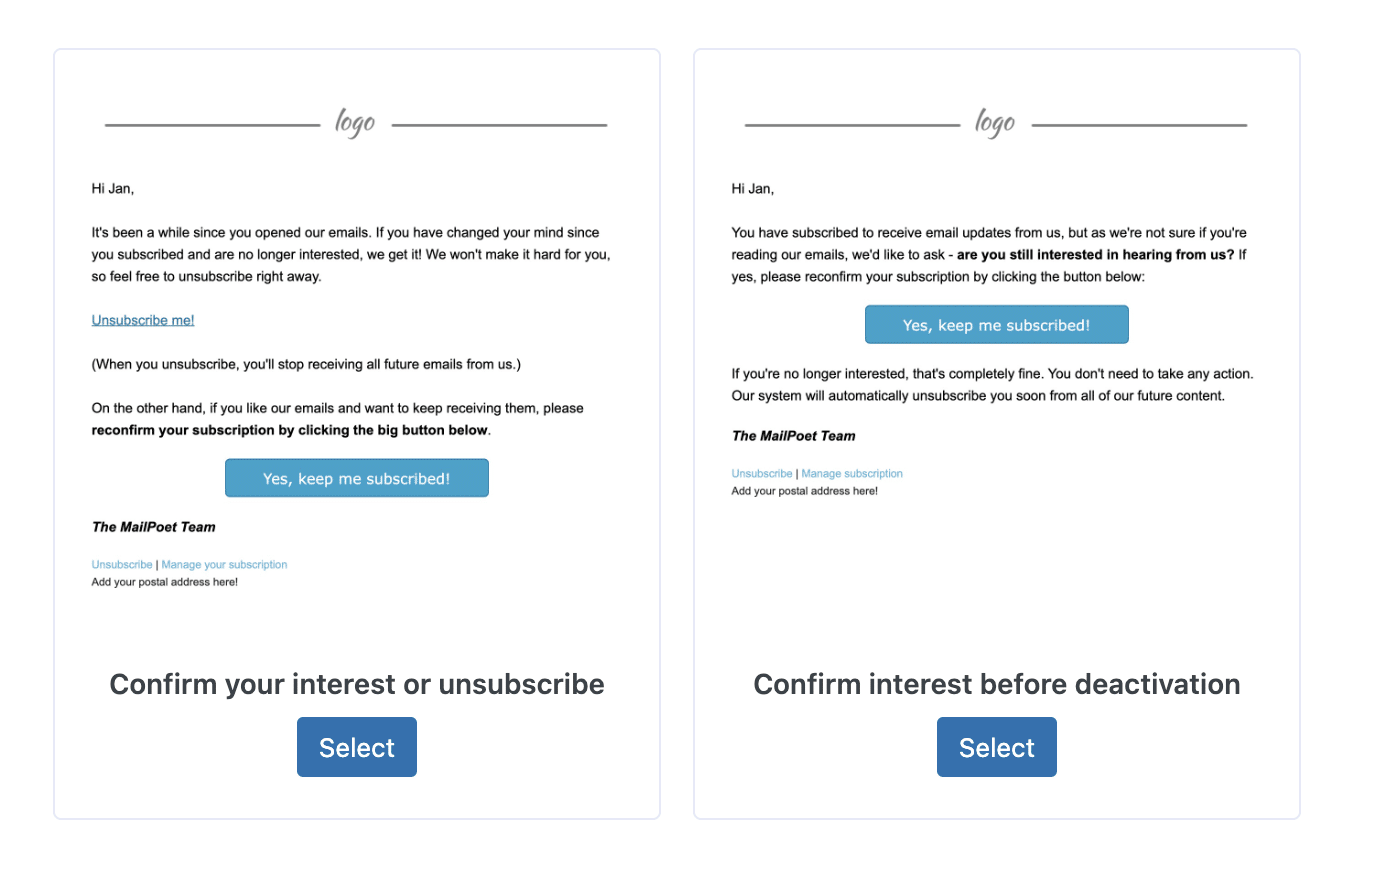 MailPoet offers the option to confirm interest or unsubscribe to your emails.